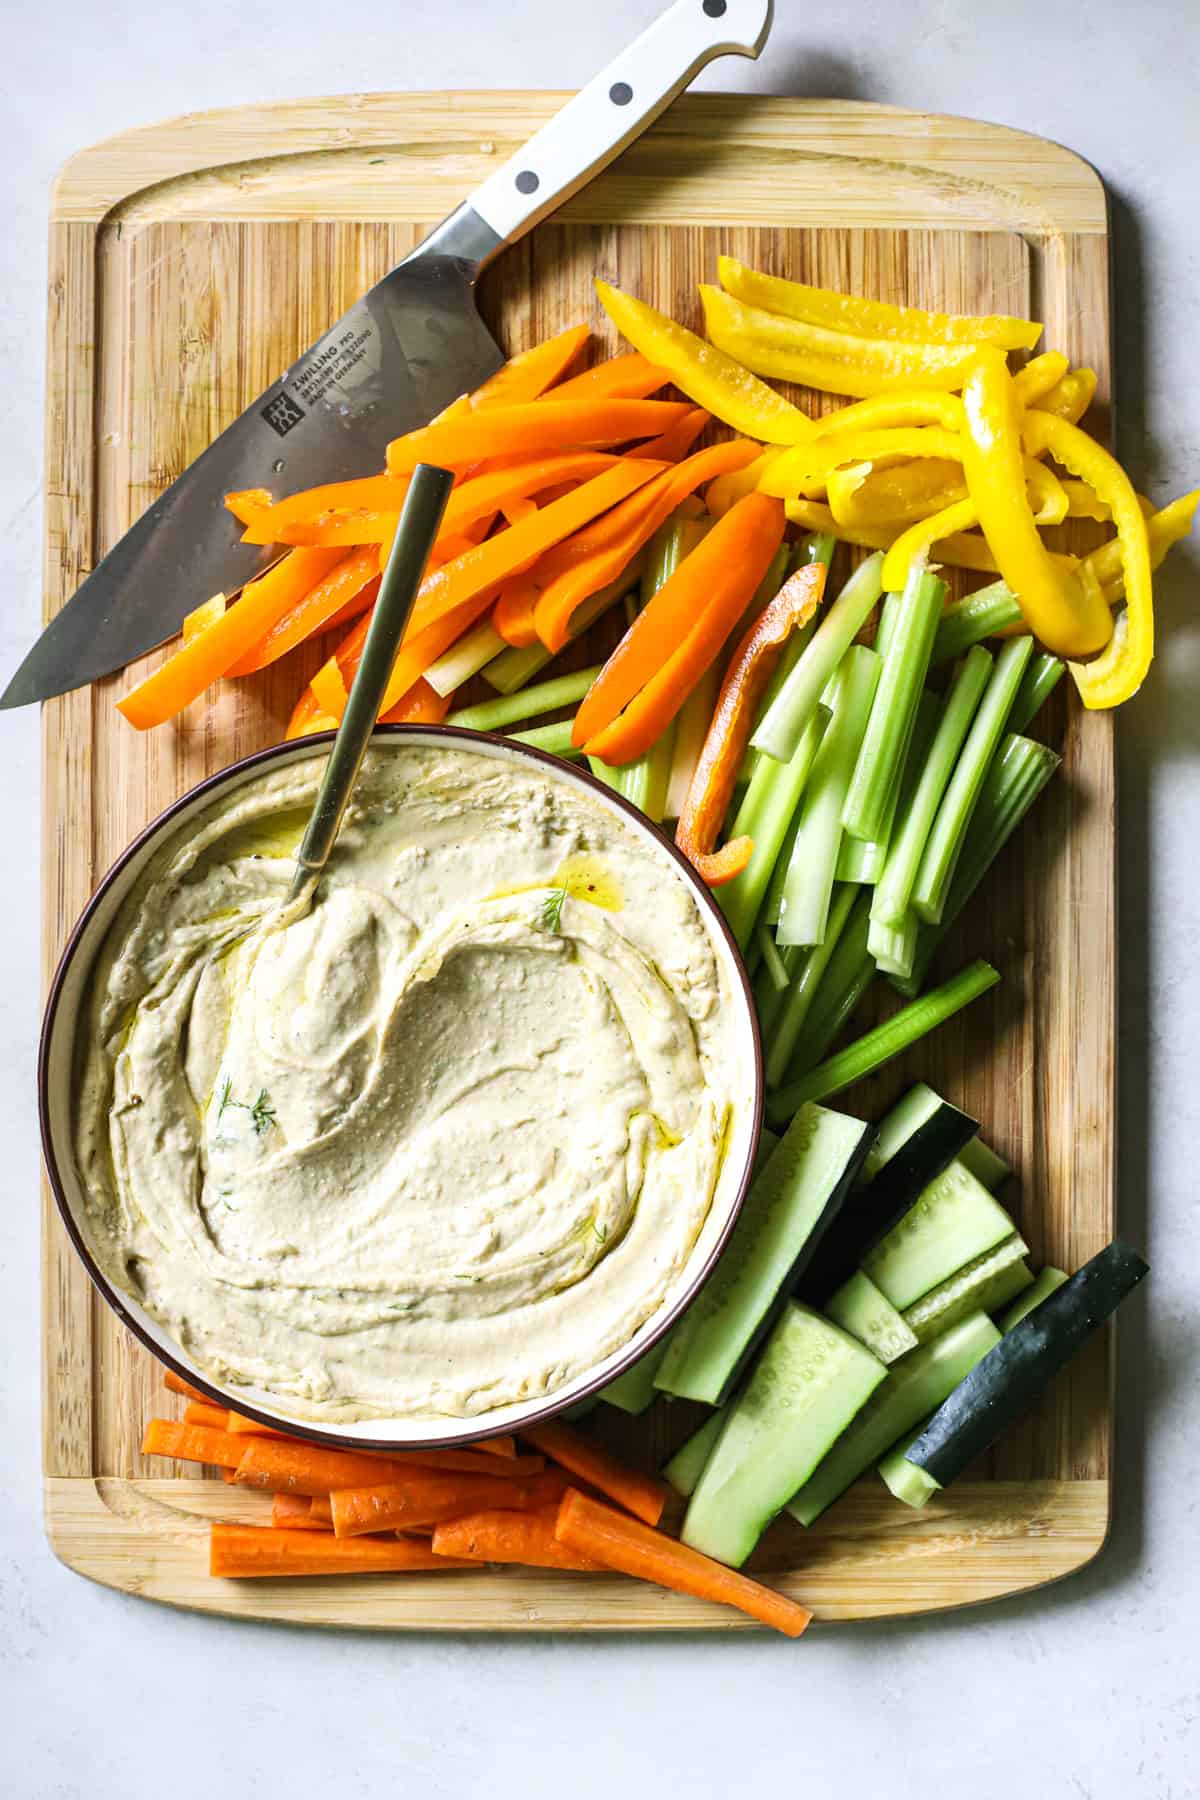 Carrots, cucumbers, celery, and bell peppers sliced on bamboo cutting board next to bowl with hummus and chef's knife